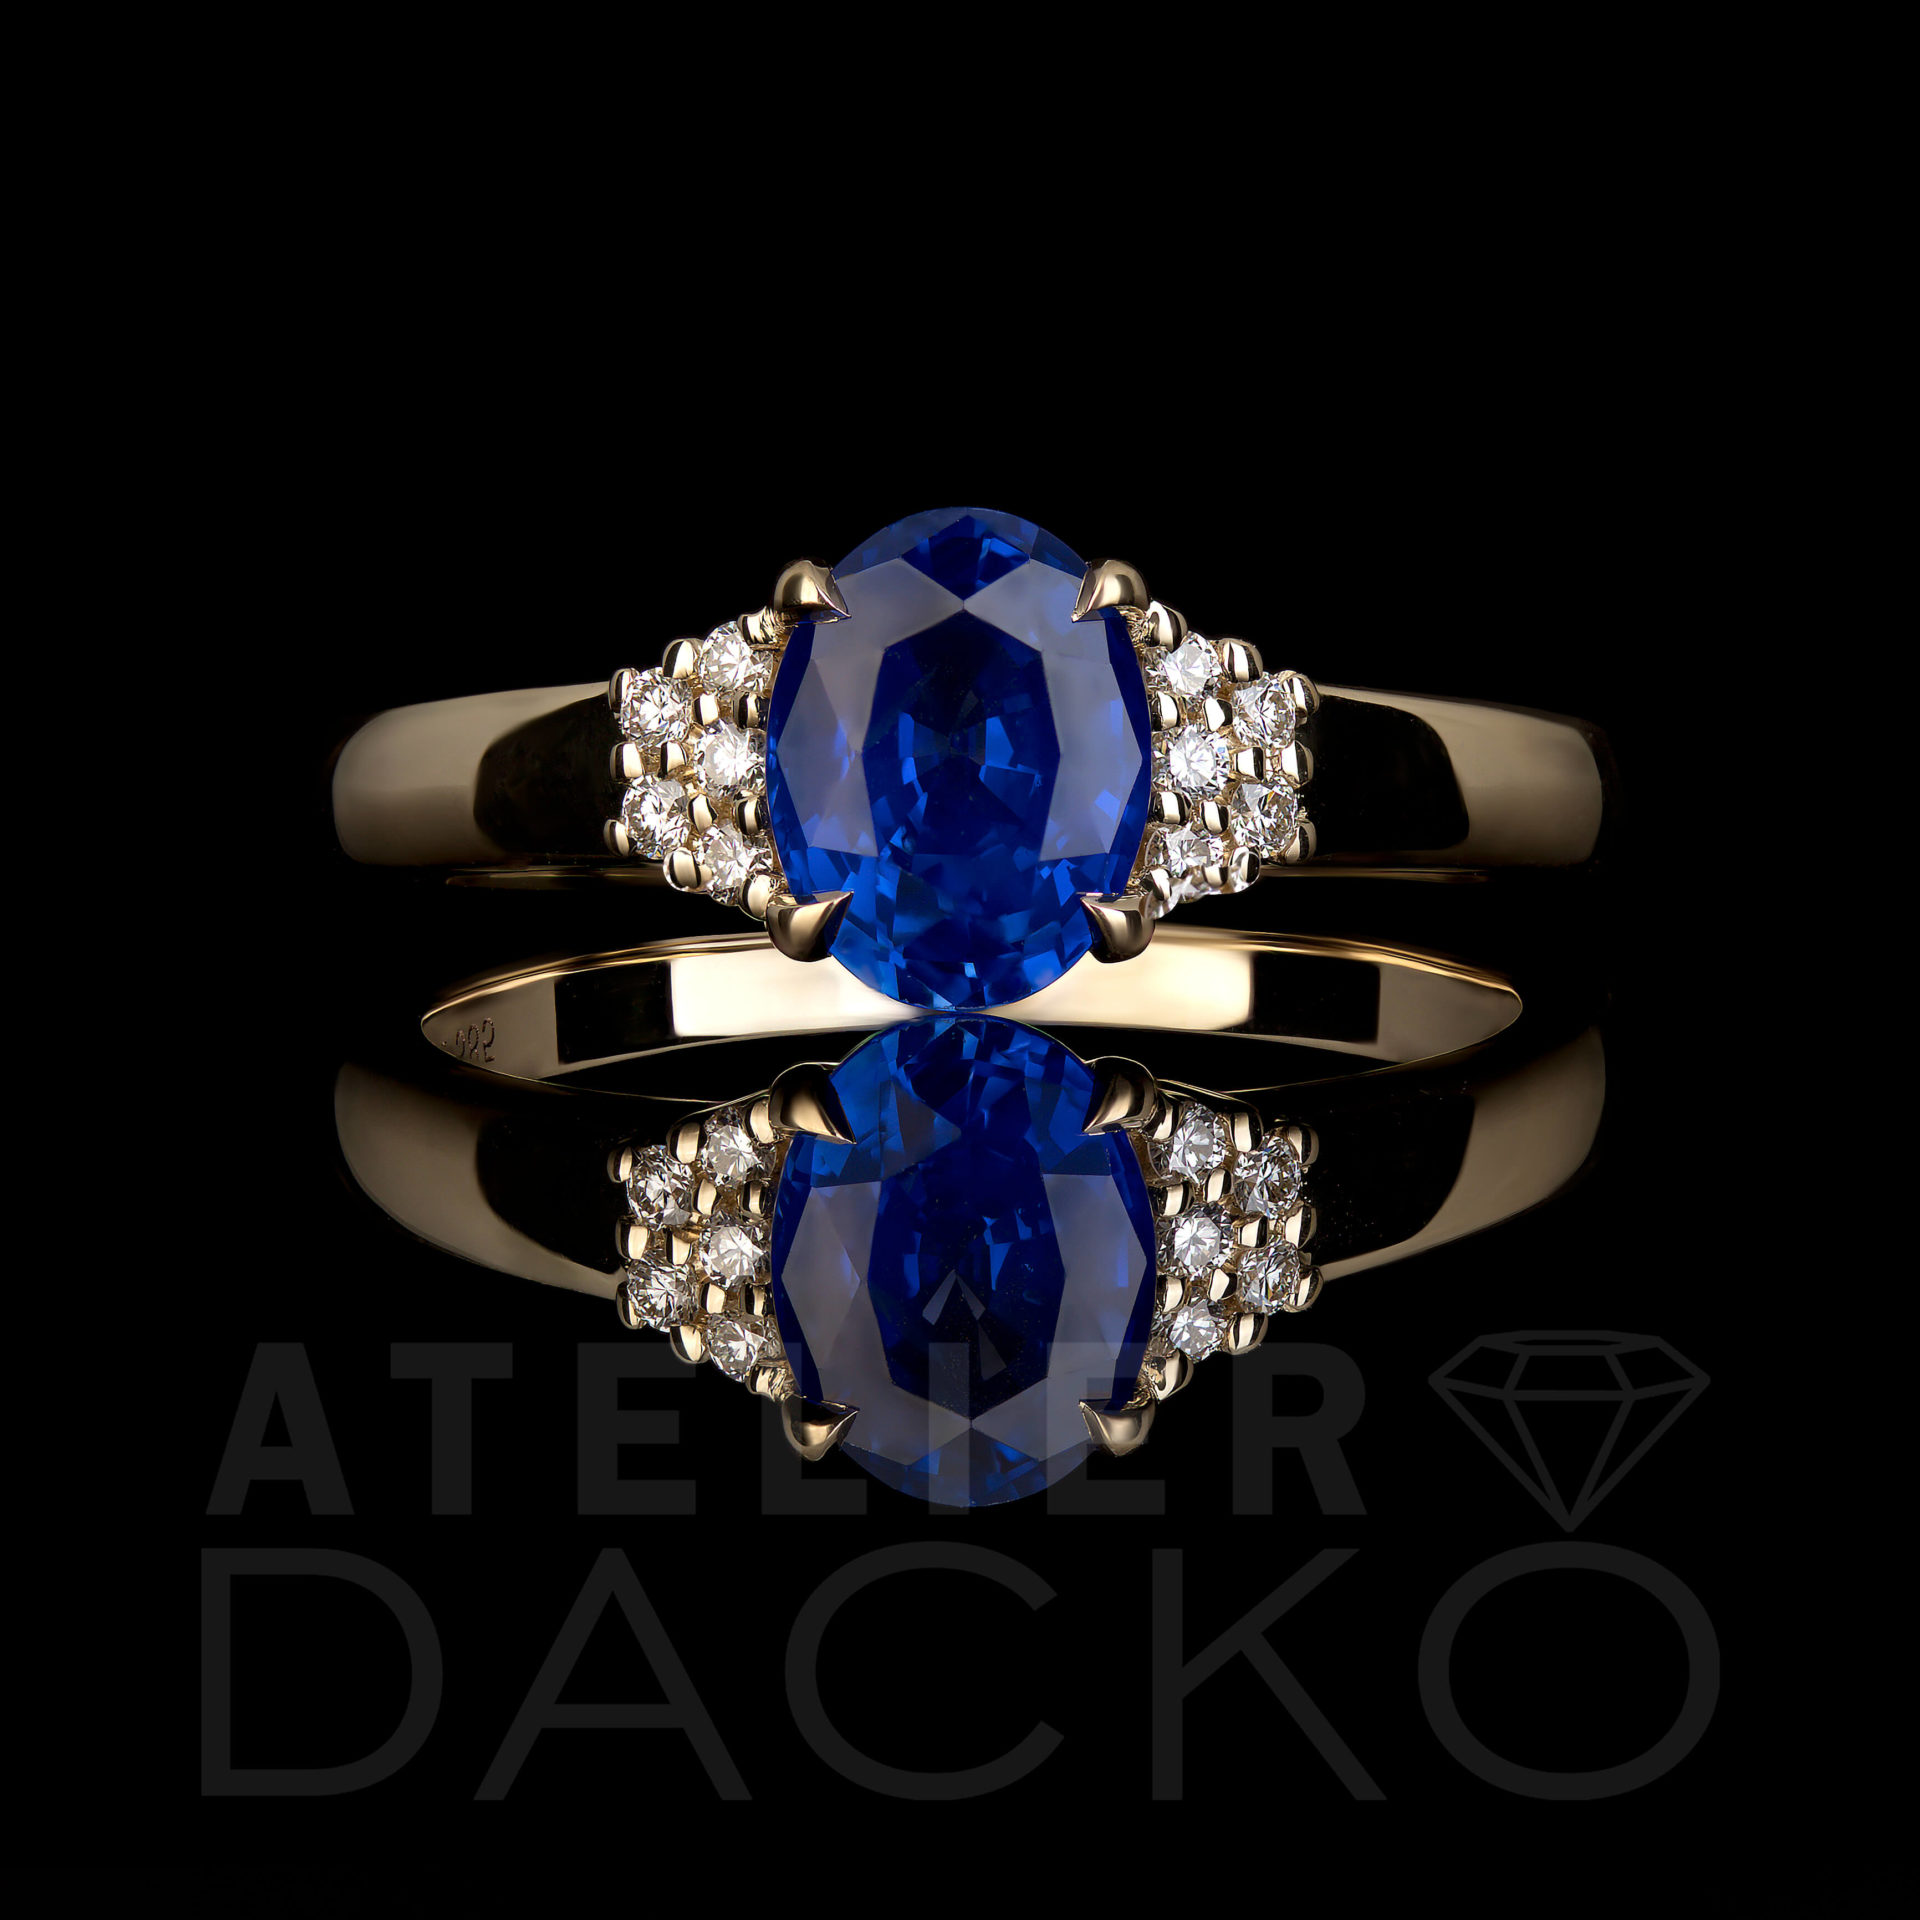 Front Facing 1.43 CT Oval Ceylon Sapphire Engagement Ring